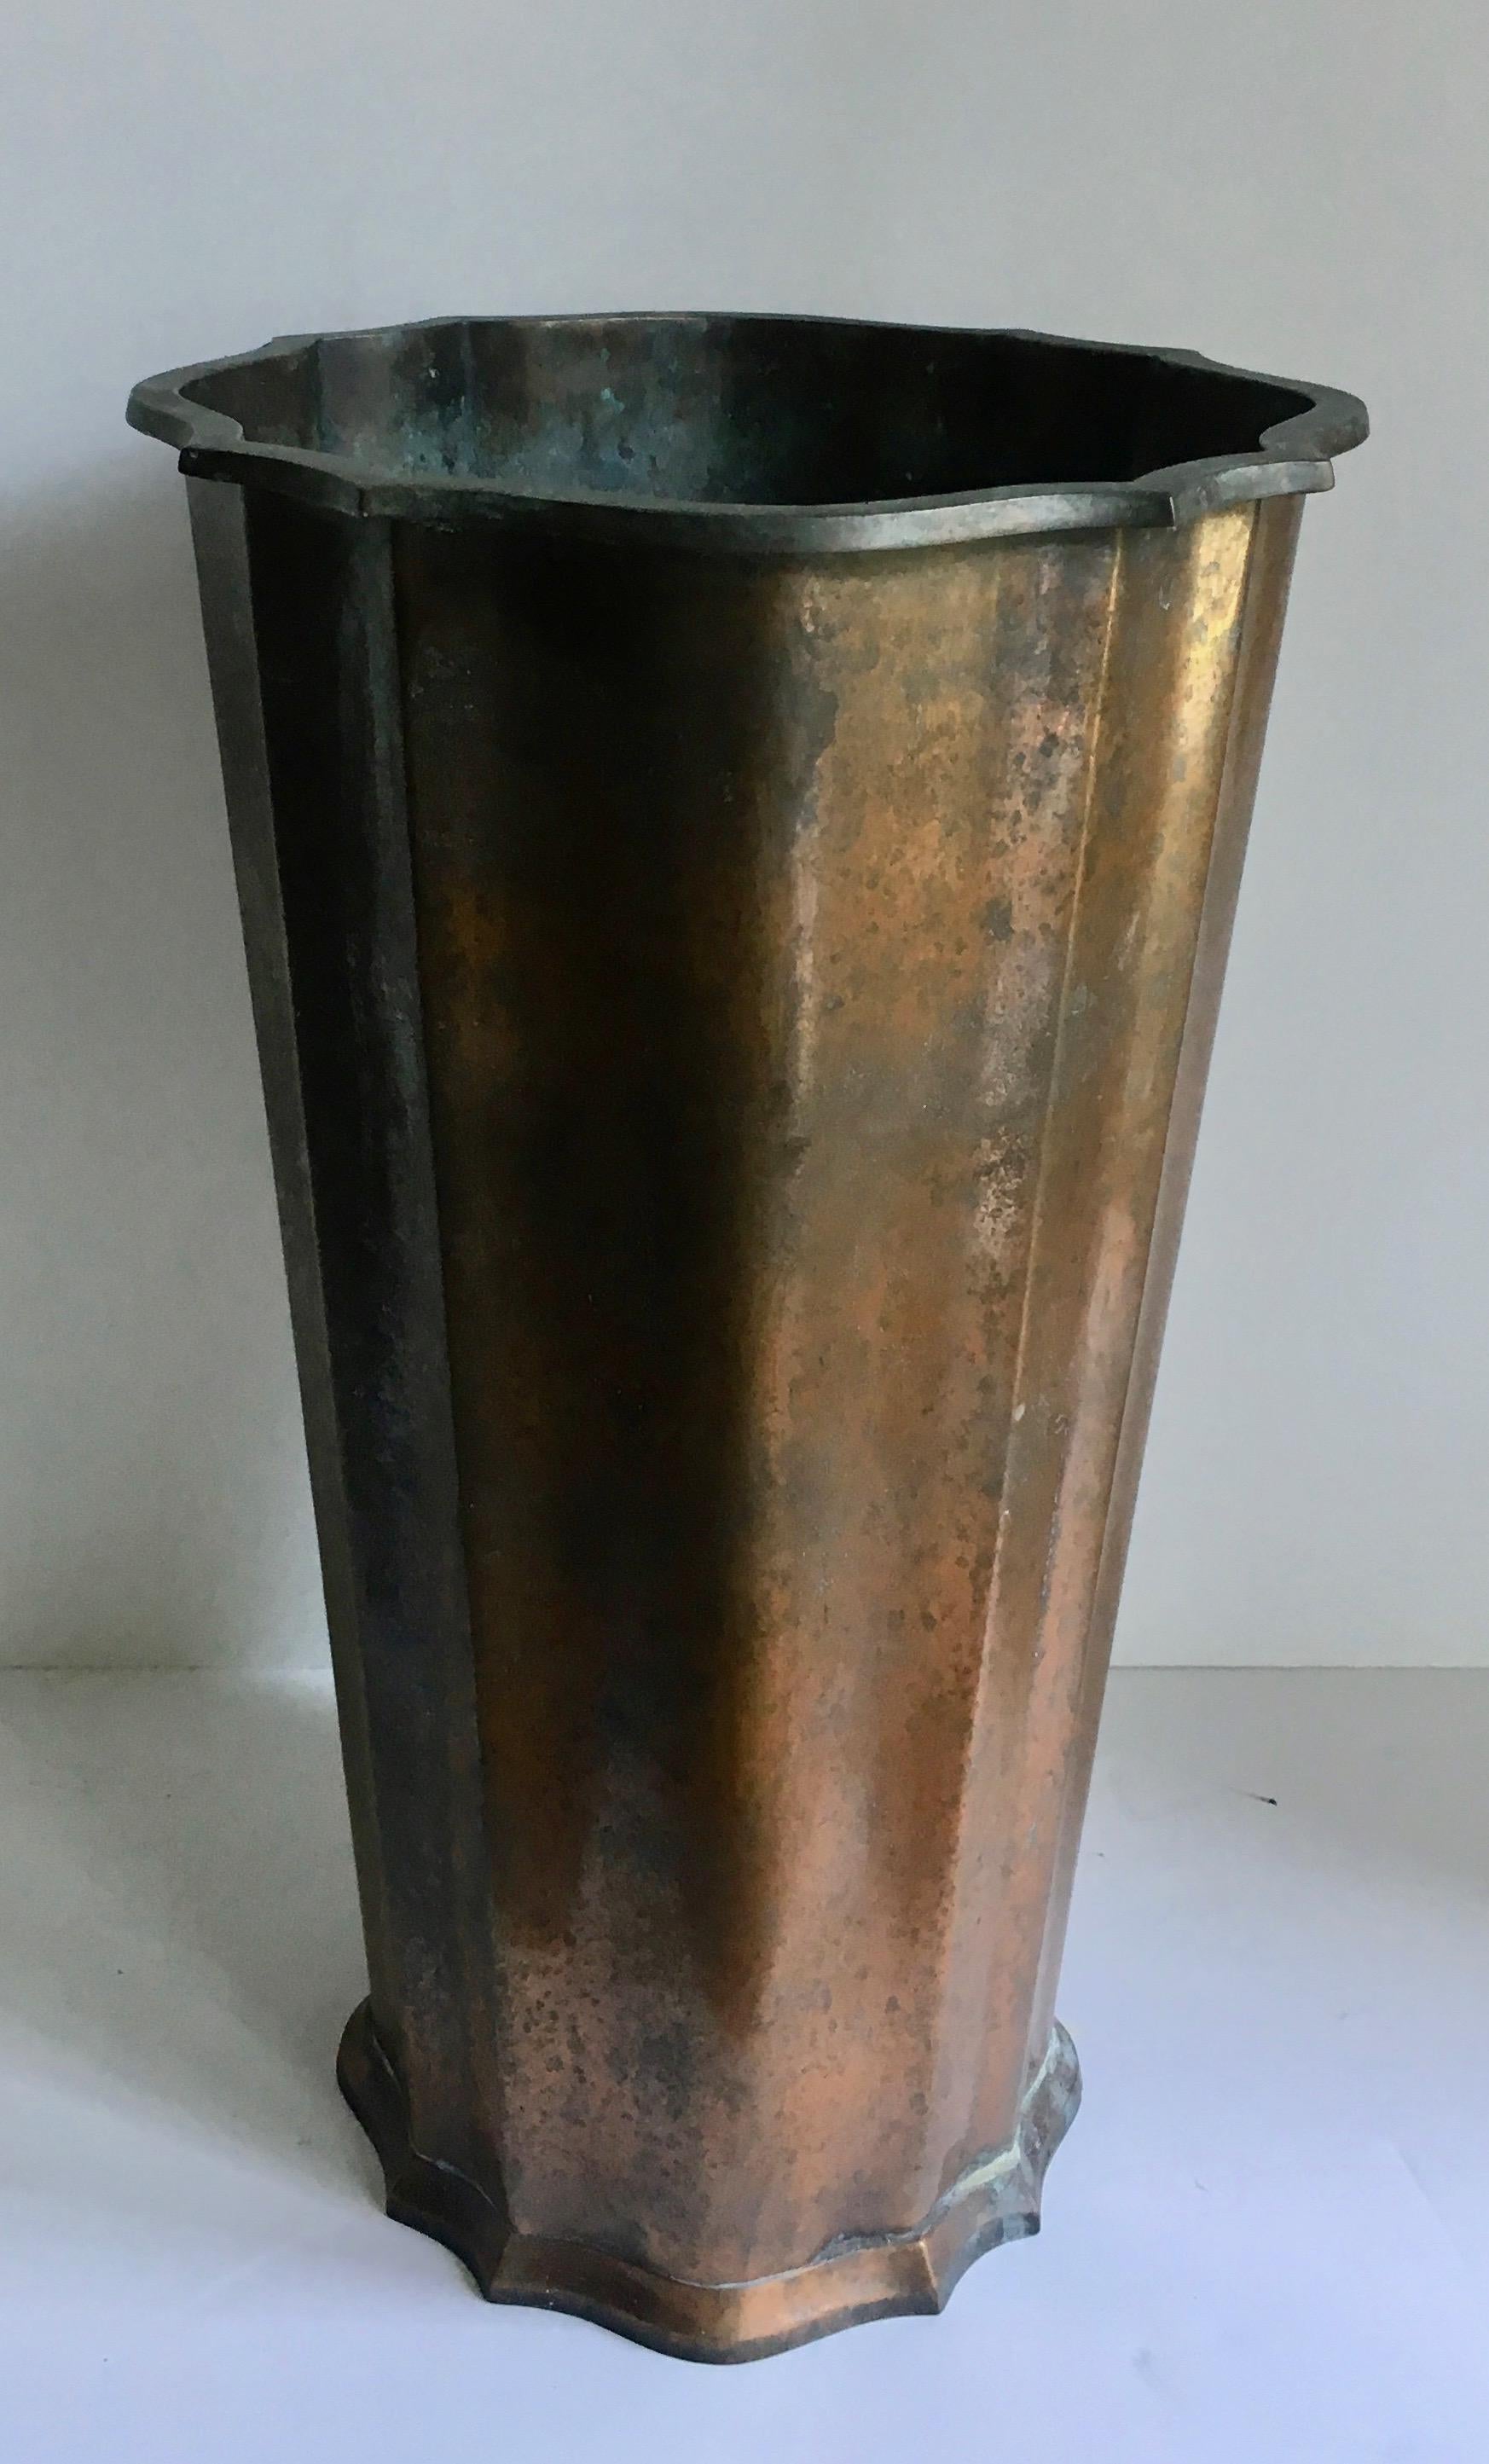 A very handsome and uniquely shaped copper umbrella stand - great patina and ready to hold umbrellas to canes and walking sticks!